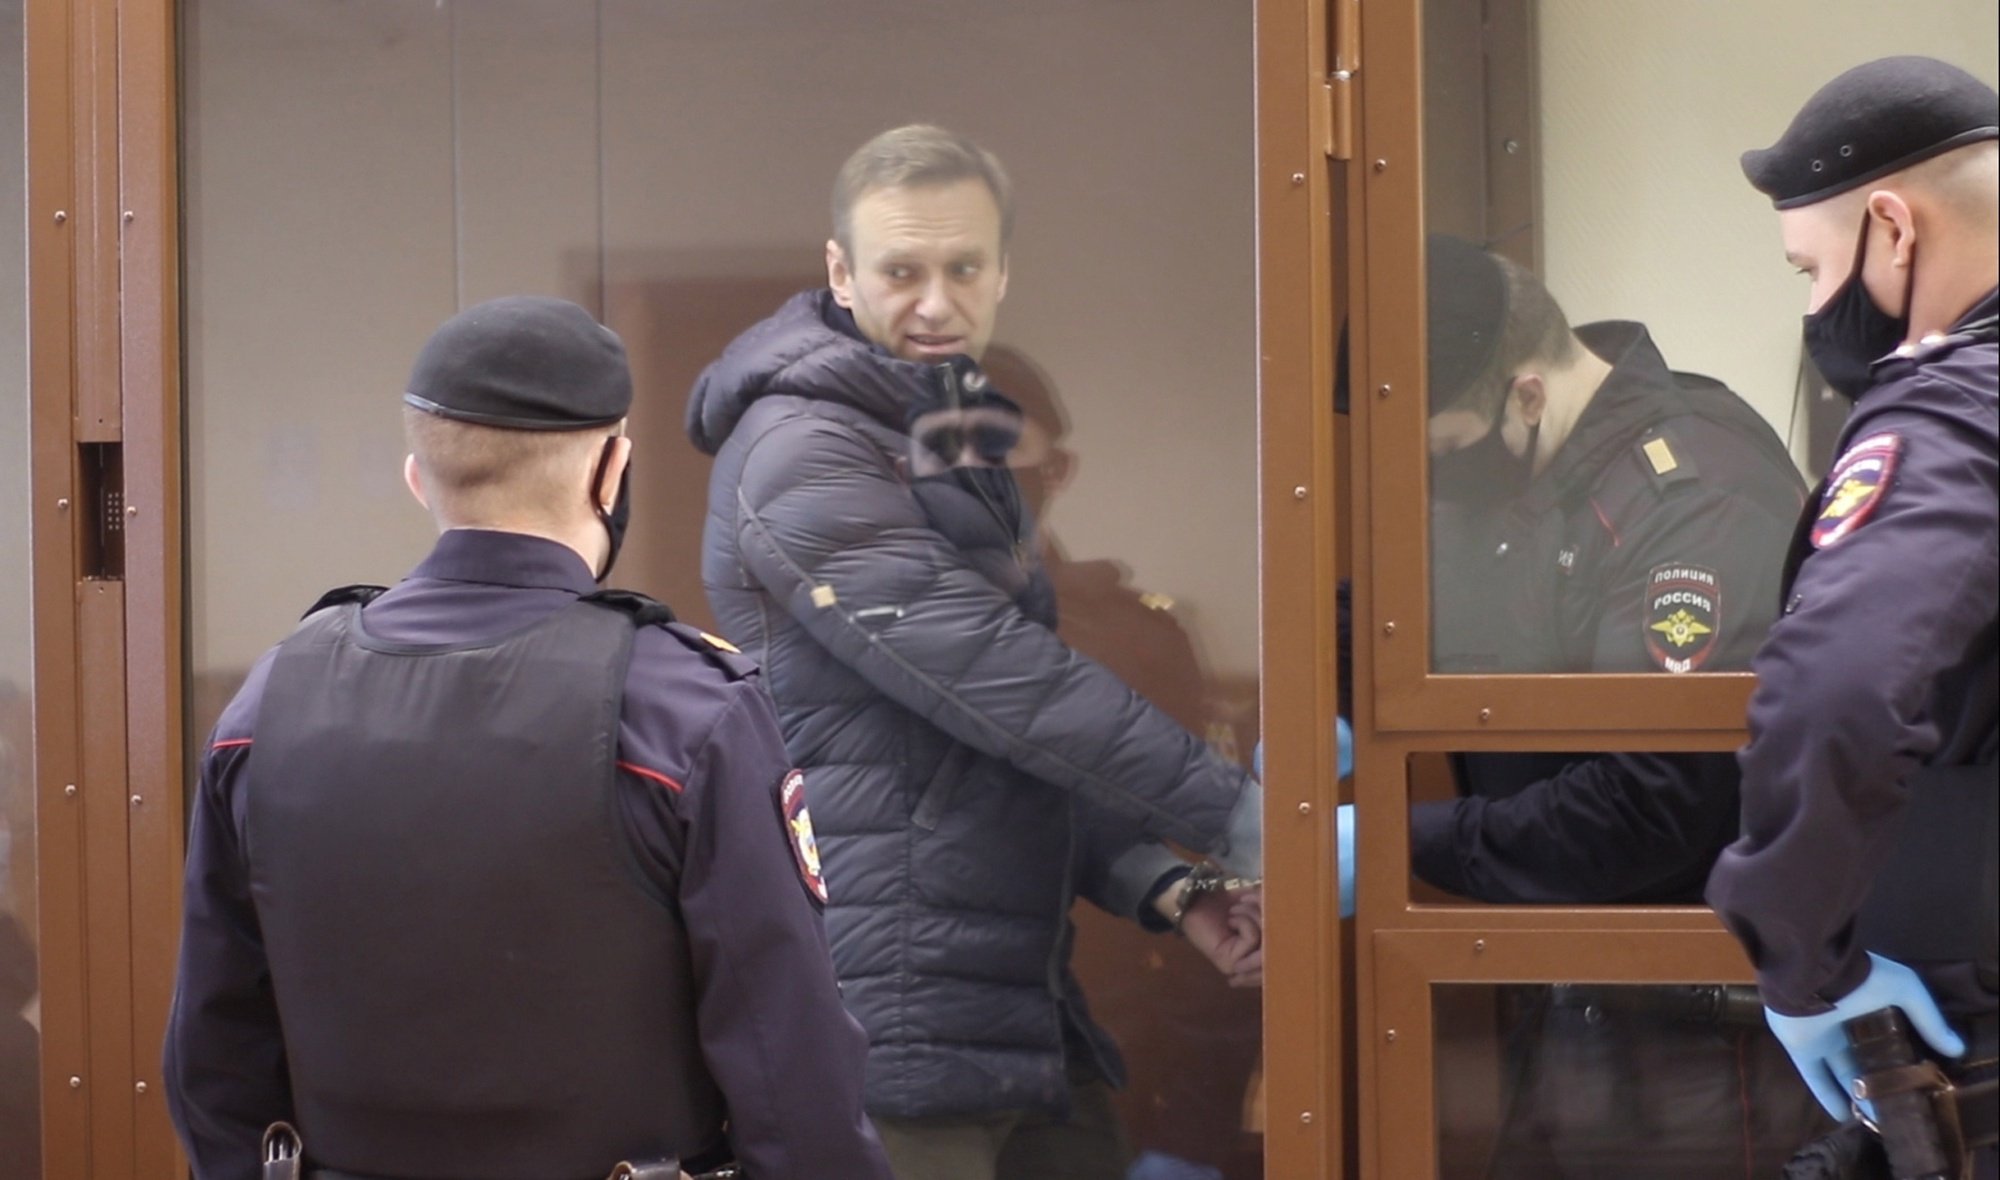 epa09015497 A still image taken from a handout video footage made available by the press service of the Babushkinsky district court shows Russian opposition leader Alexei Navalny (2-L) inside a glass cage prior to a hearing of a case on slander charges in Moscow, Russia, 16 February 2021. In June 2020 the Russian Investigative Committee opened a criminal case against Alexei Navalny on charges of slander against WWII veteran Ignat Artemenko after Navalny&#039;s comment about a video promoting the amendments to the Russian Constitution.  EPA/BABUSHKINSKY DISTRICT COURT PRES -- MANDATORY CREDIT -- BEST QUALITY AVAILABLE -- HANDOUT EDITORIAL USE ONLY/NO SALES